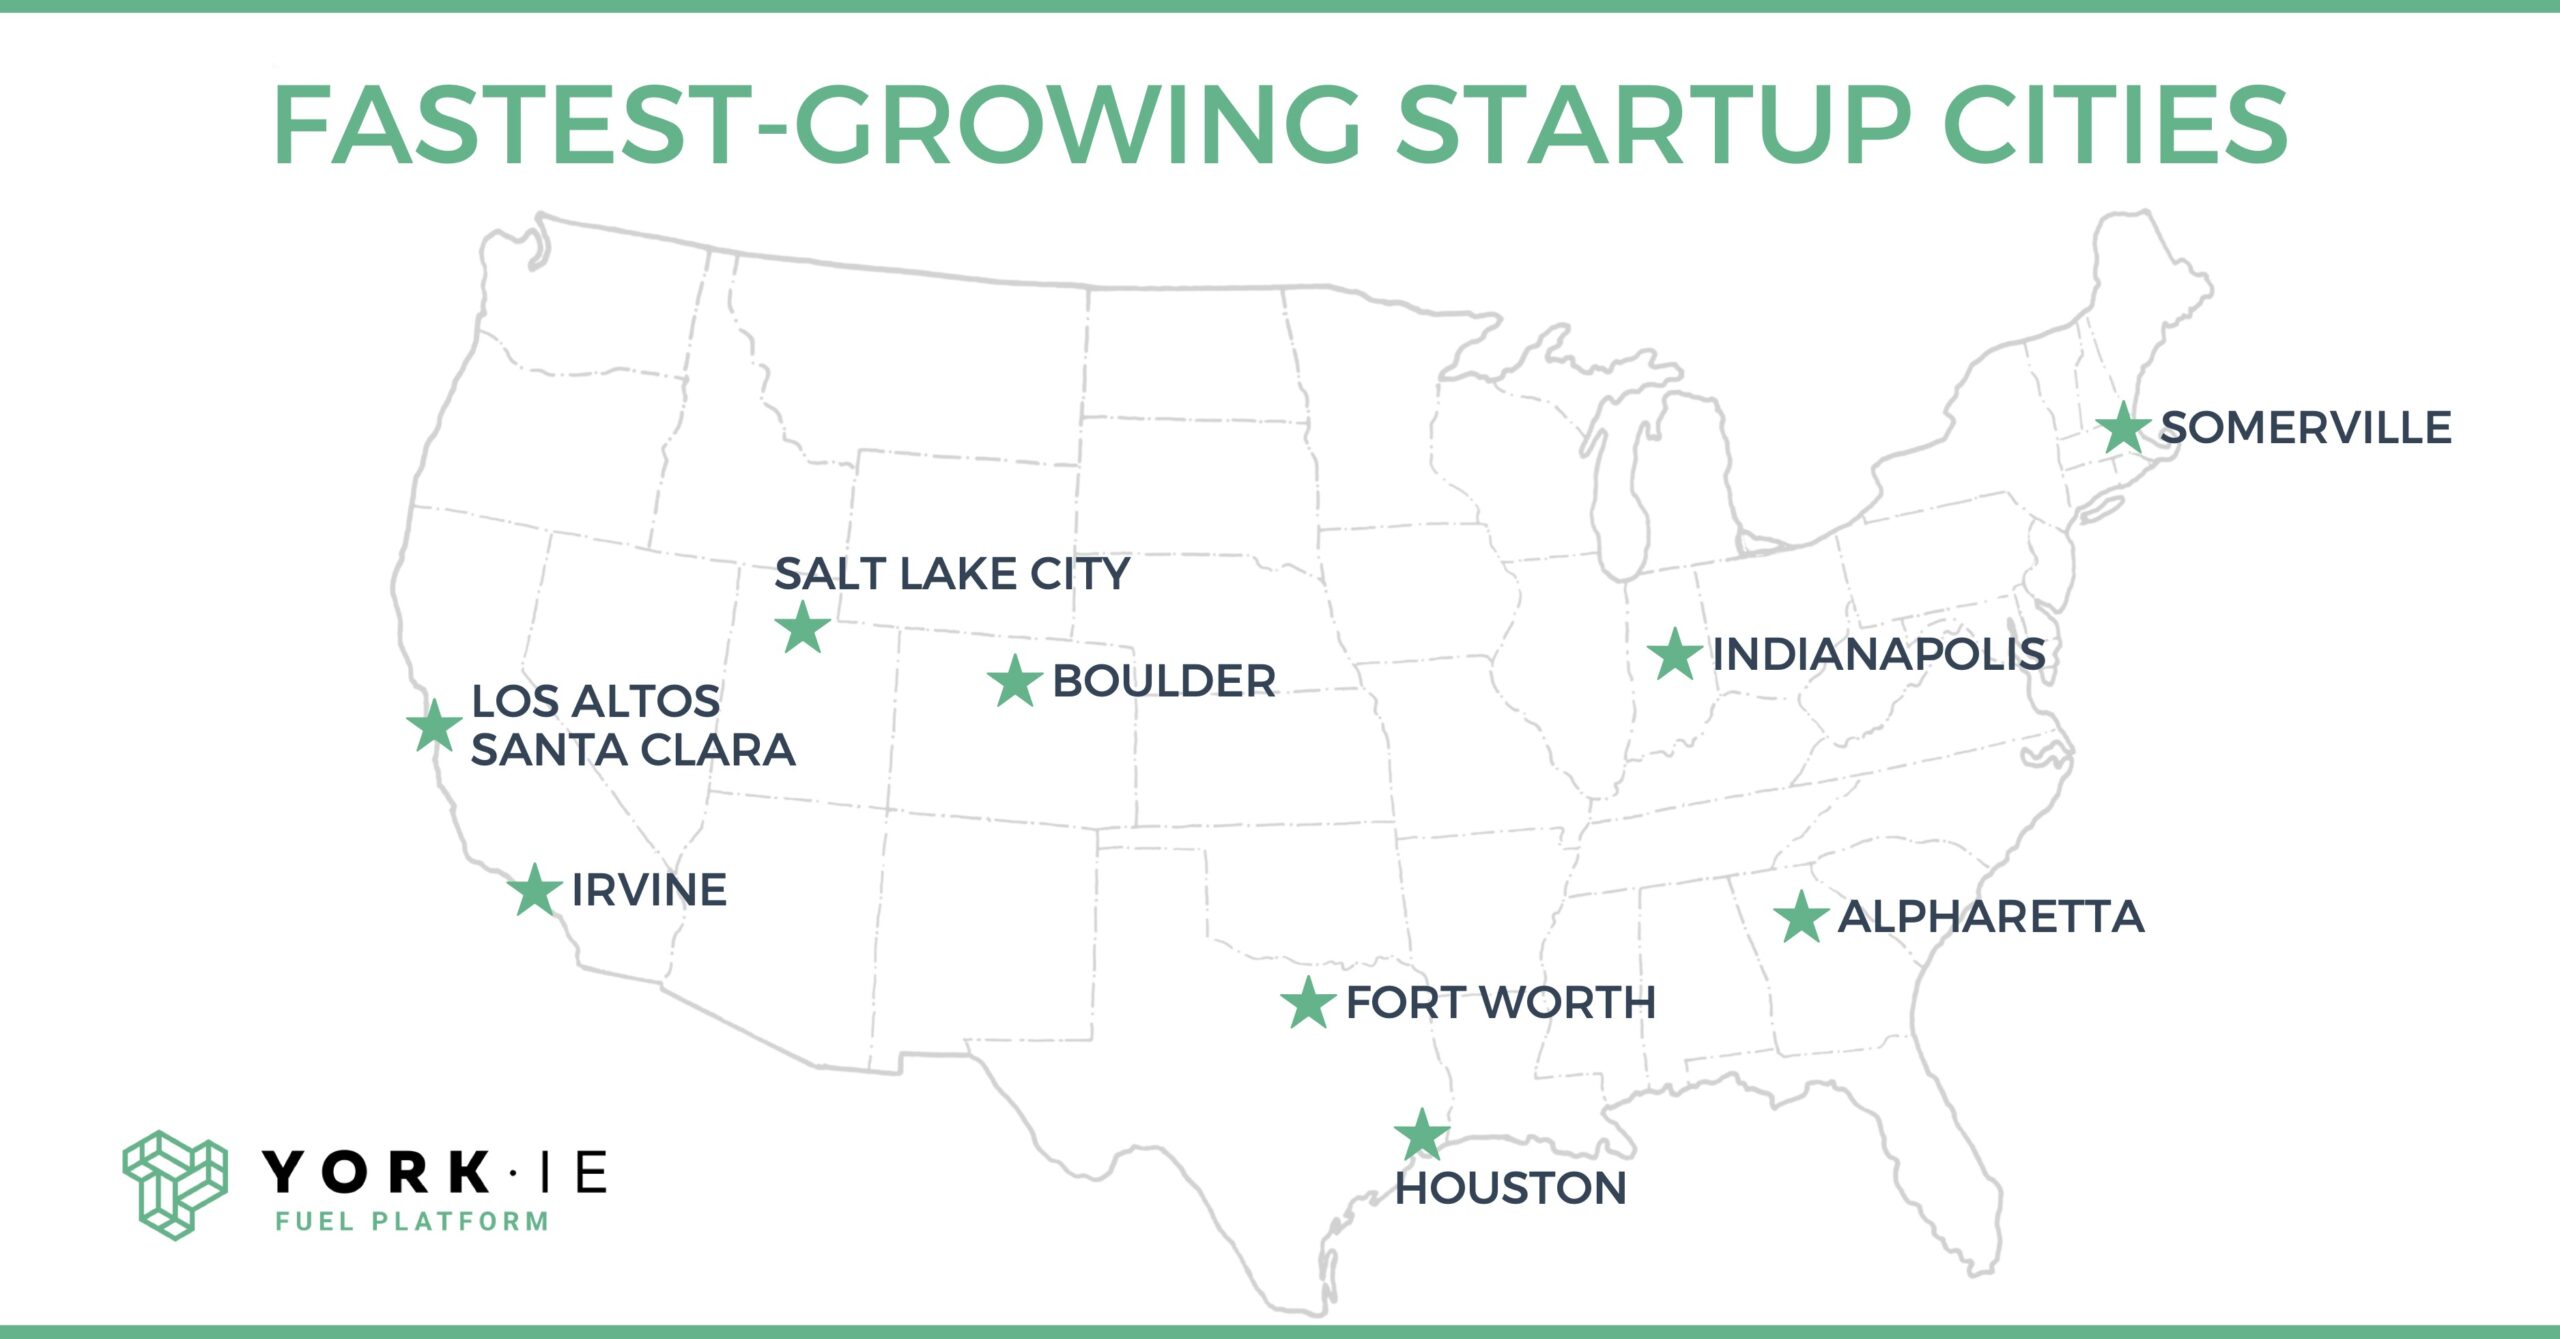 America’s Fastest-Growing Startup Cities